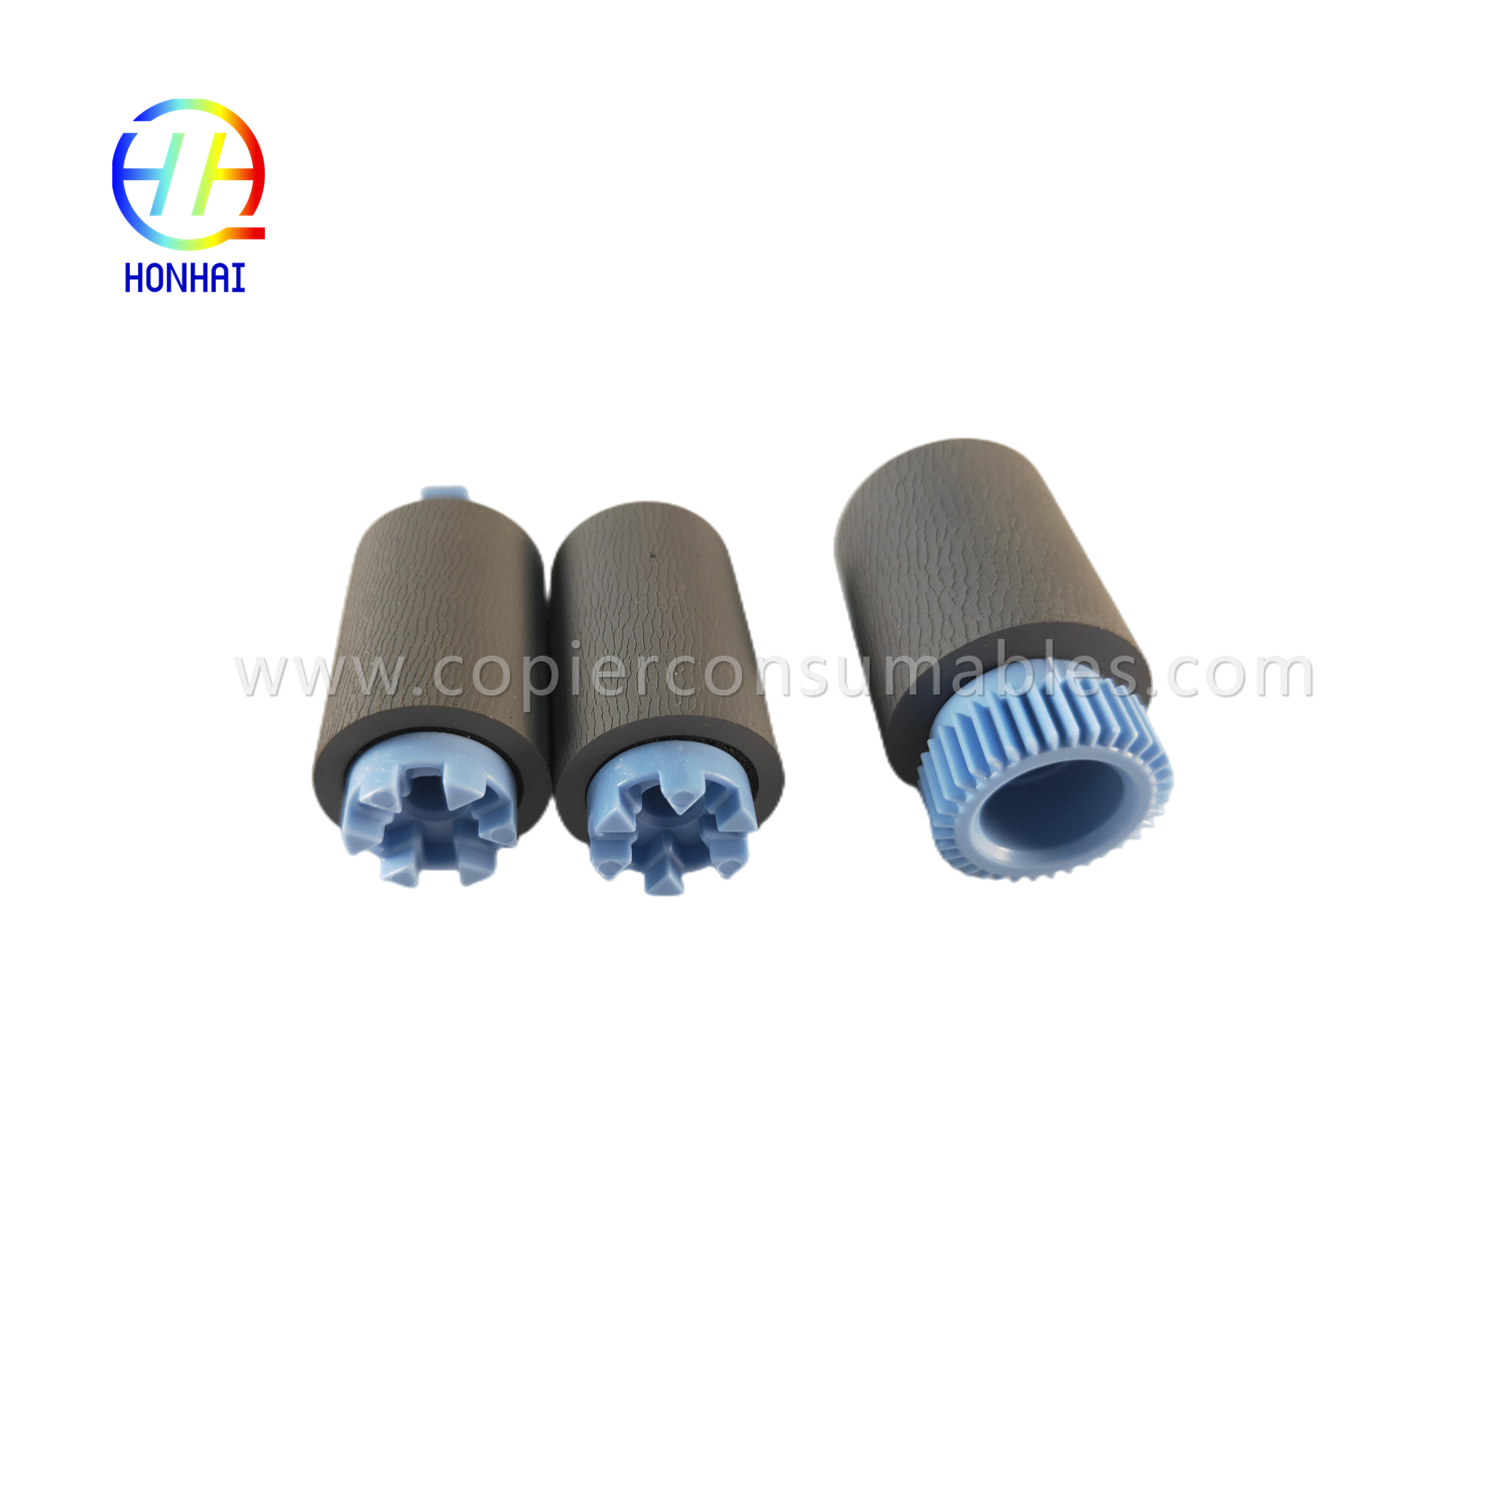 https://www.copierconsumables.com/tray-2-5-pickup-feed-separation-roller-set-for-hp-a7w93-67082-mfp-785f-780dn-e77650z-e77660z-e77650dn-e77660dn-p77740dn- p77750z-p77760z-p75050dn-p75050dw-product/